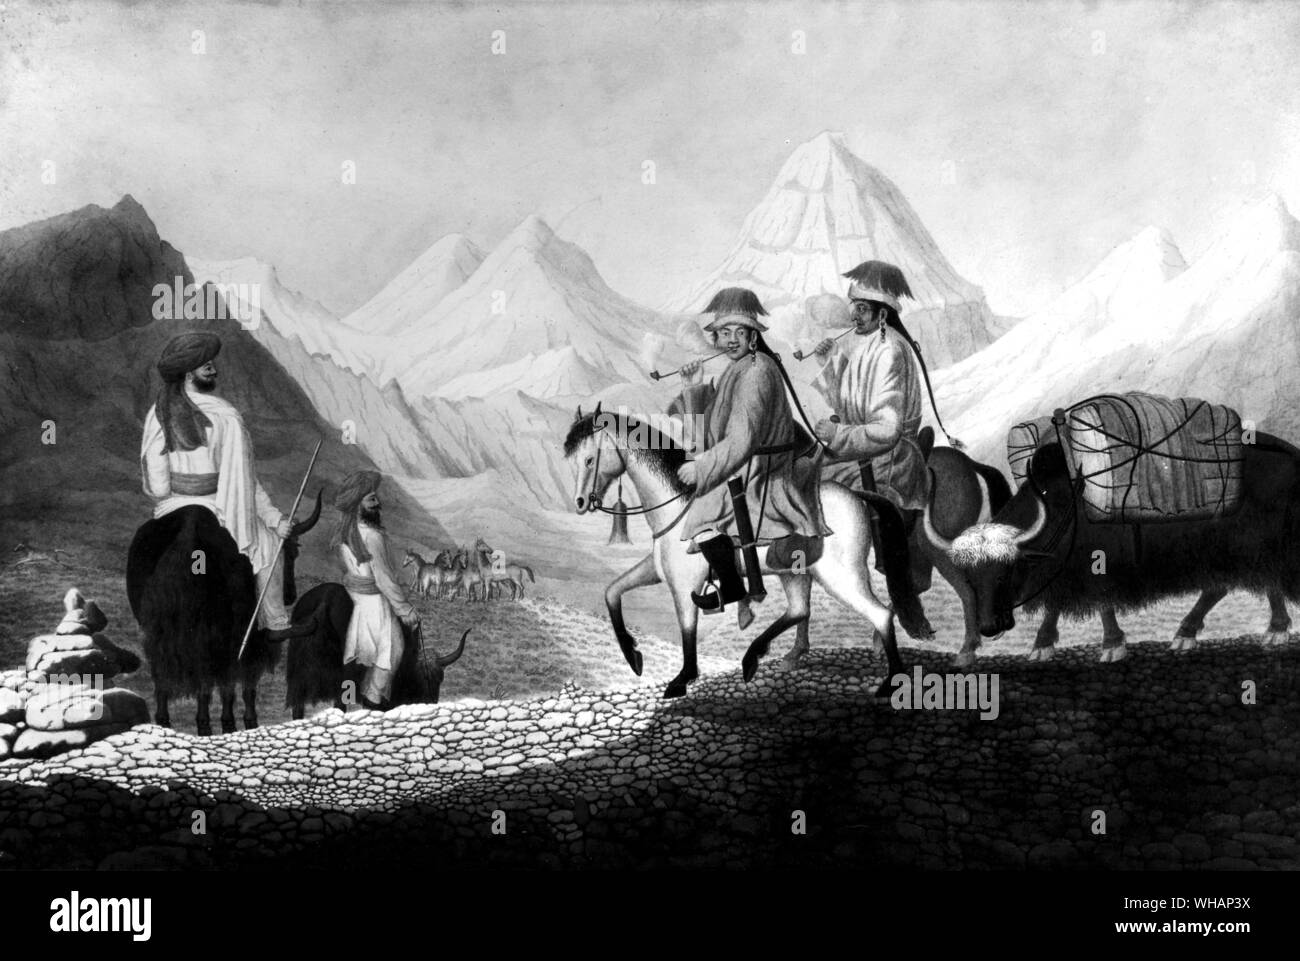 Moorcroft and Hearsey on the road to Lake Mansarowar (Tibet). The travellers wearing Indian dress, and riding on Yaks, are shown meeting two Tibetans on horseback with a loaded Yak. Stock Photo